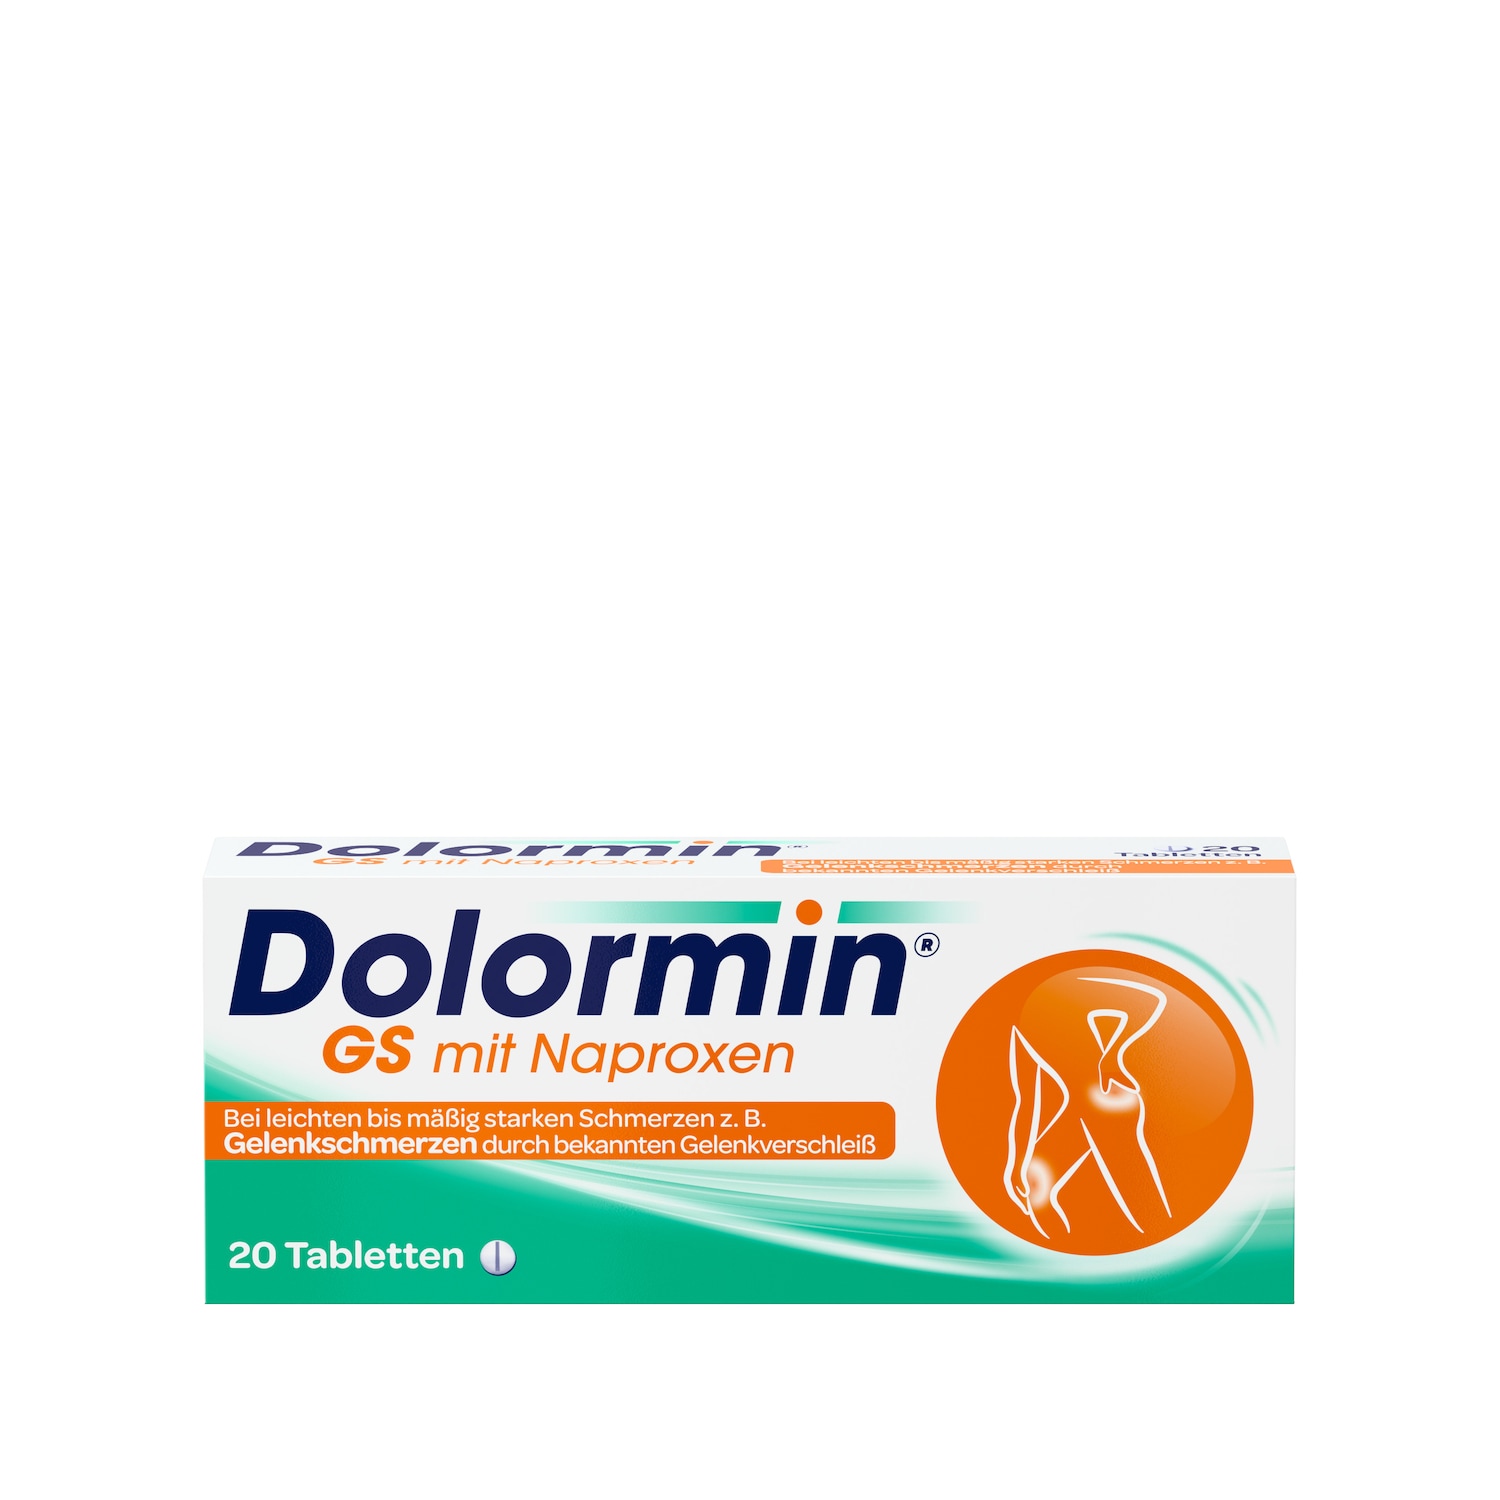 Dolormin GS with naproxen tablets